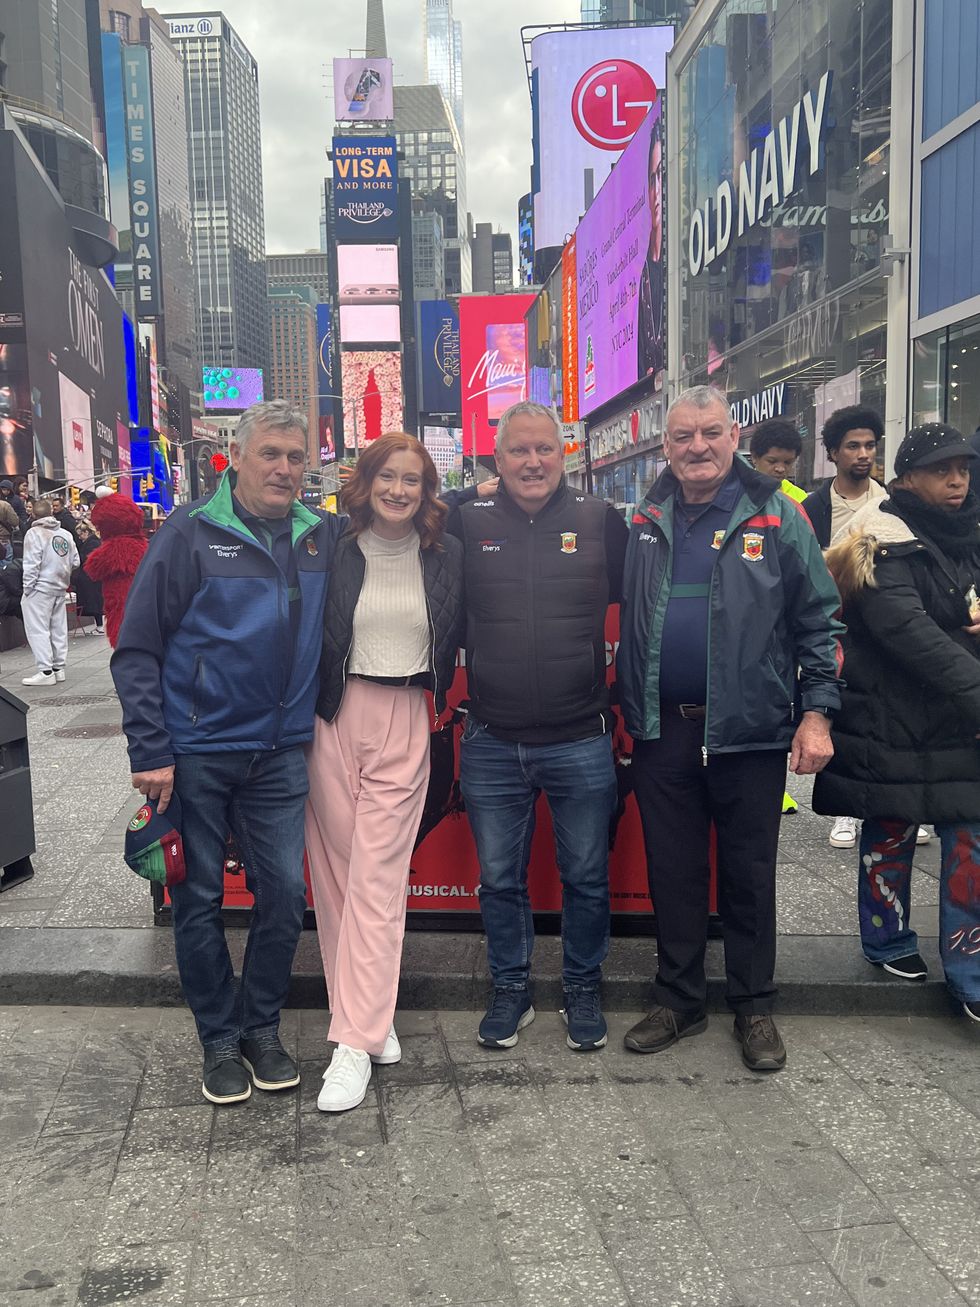 Woman reunited with Irishmen five years after taking viral photo in Times Square